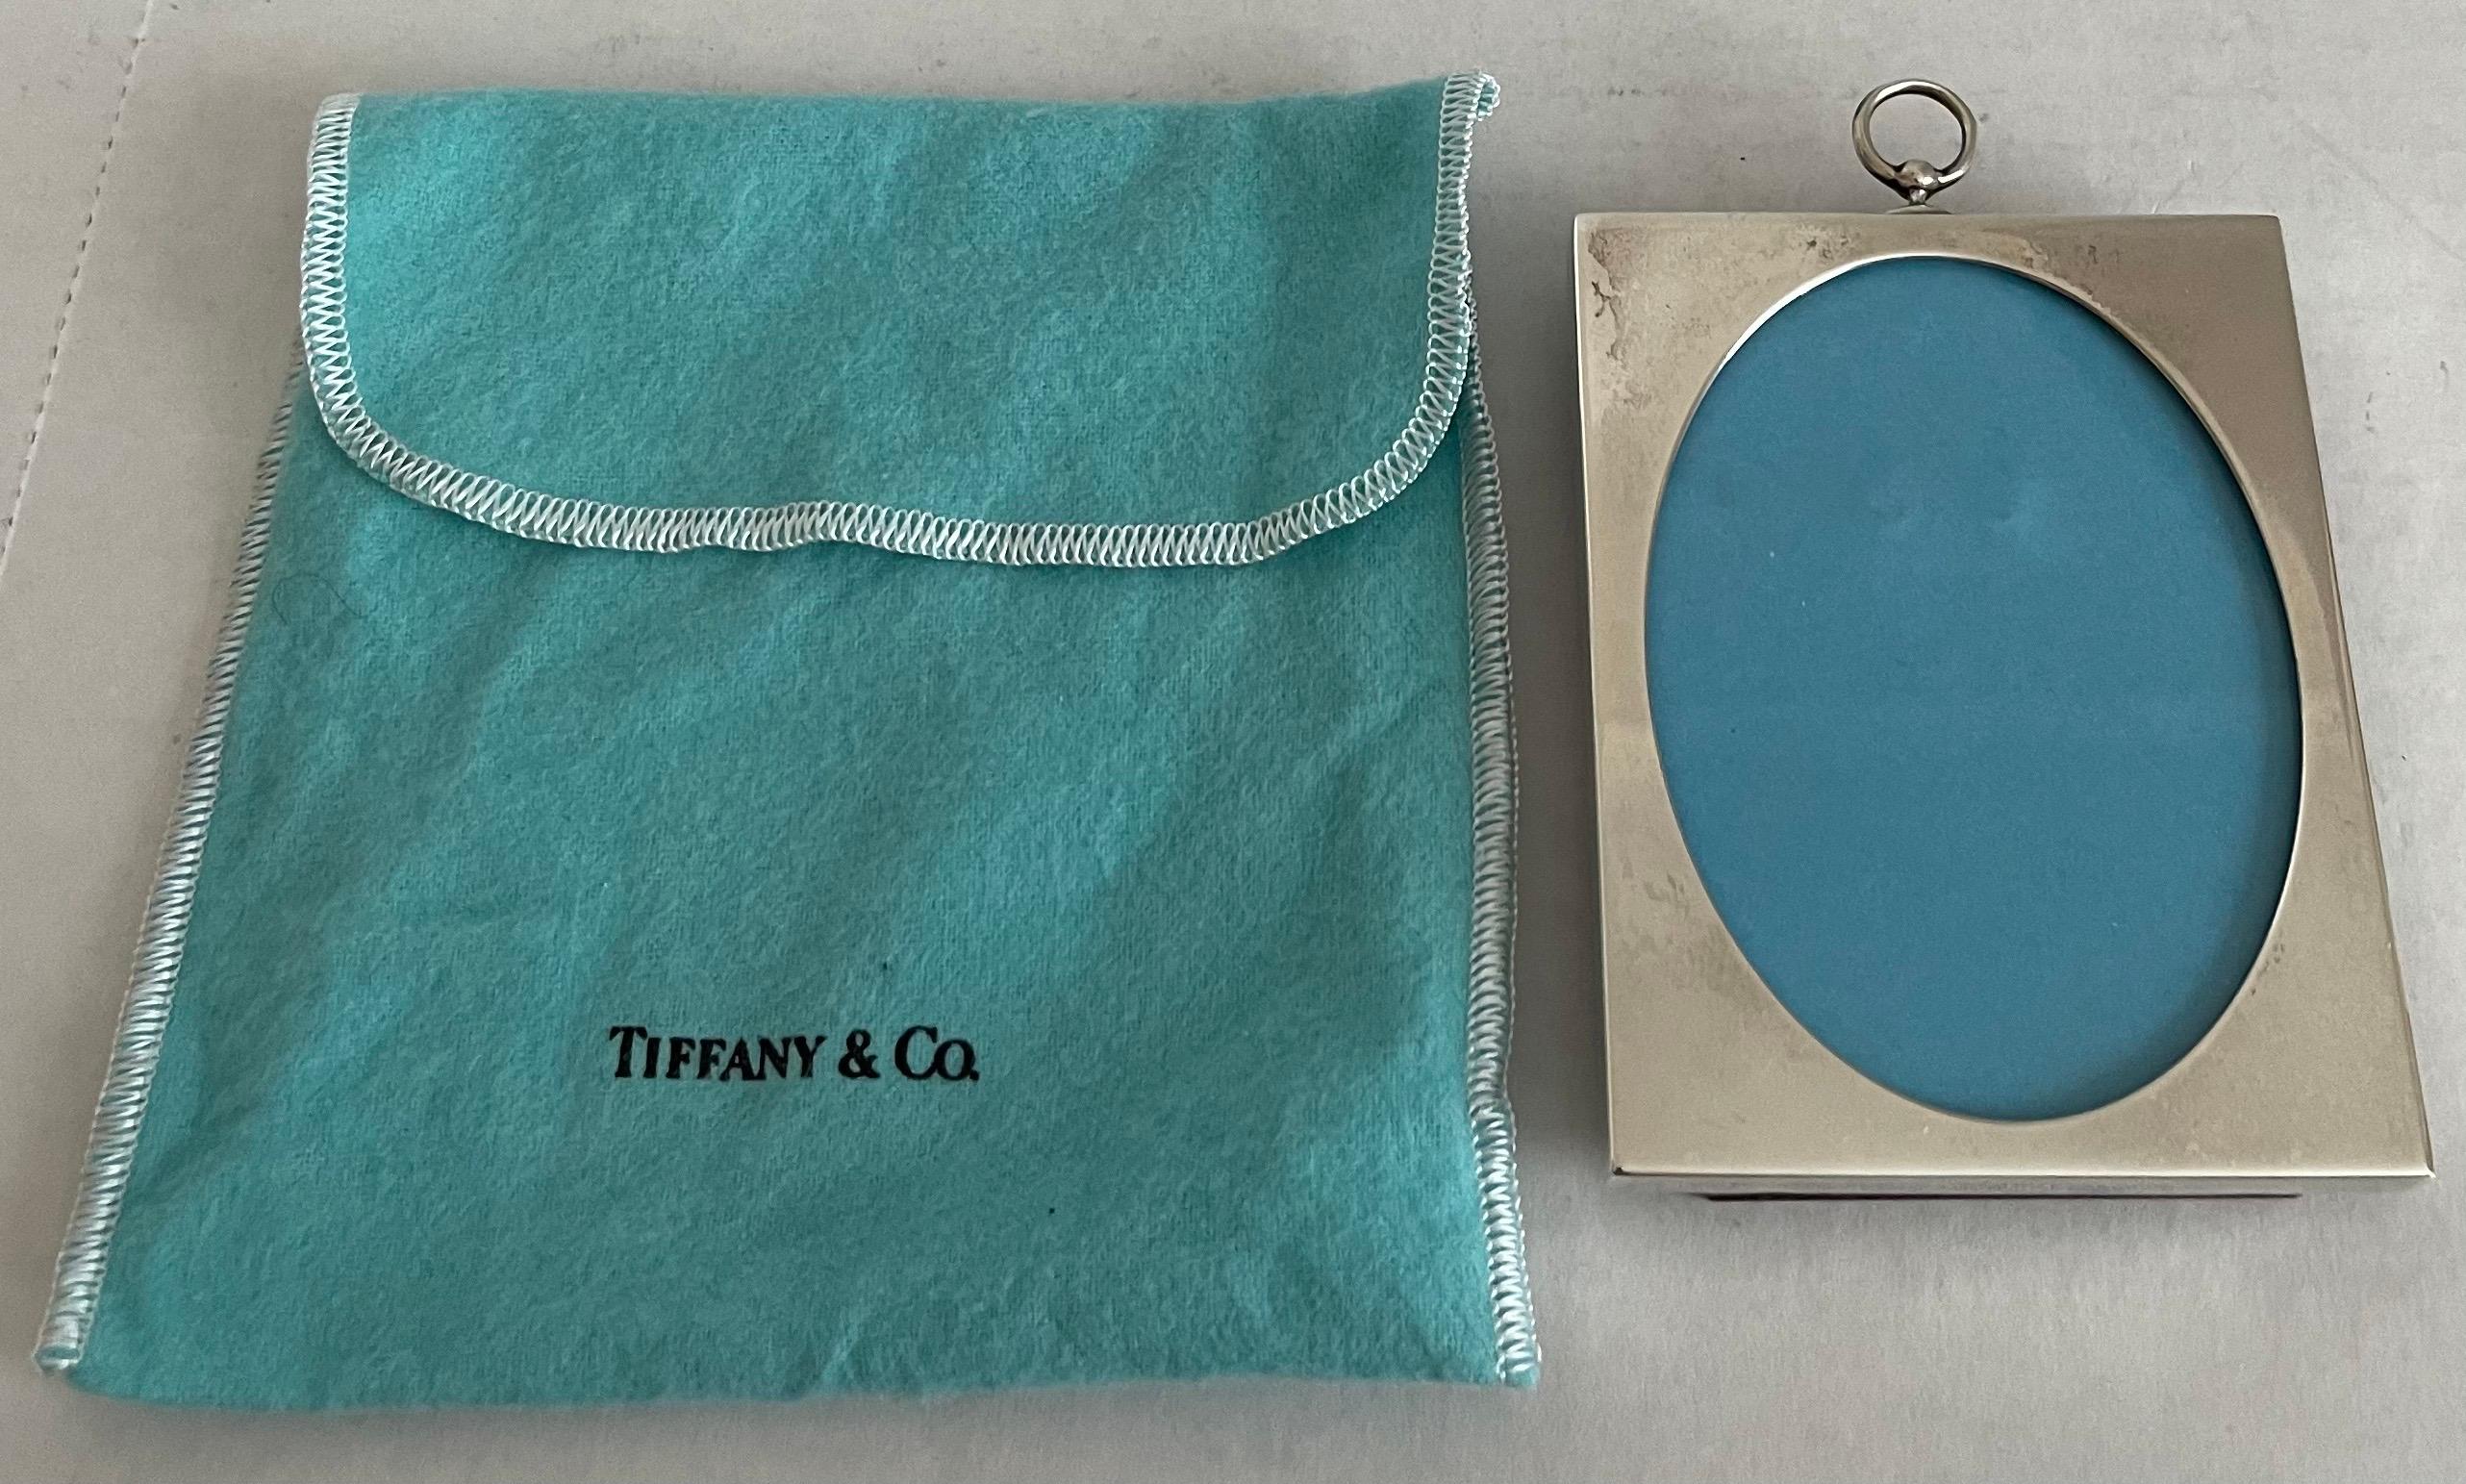 Late 20th Century Tiffany & Co. Sterling Silver Small Picture Frame